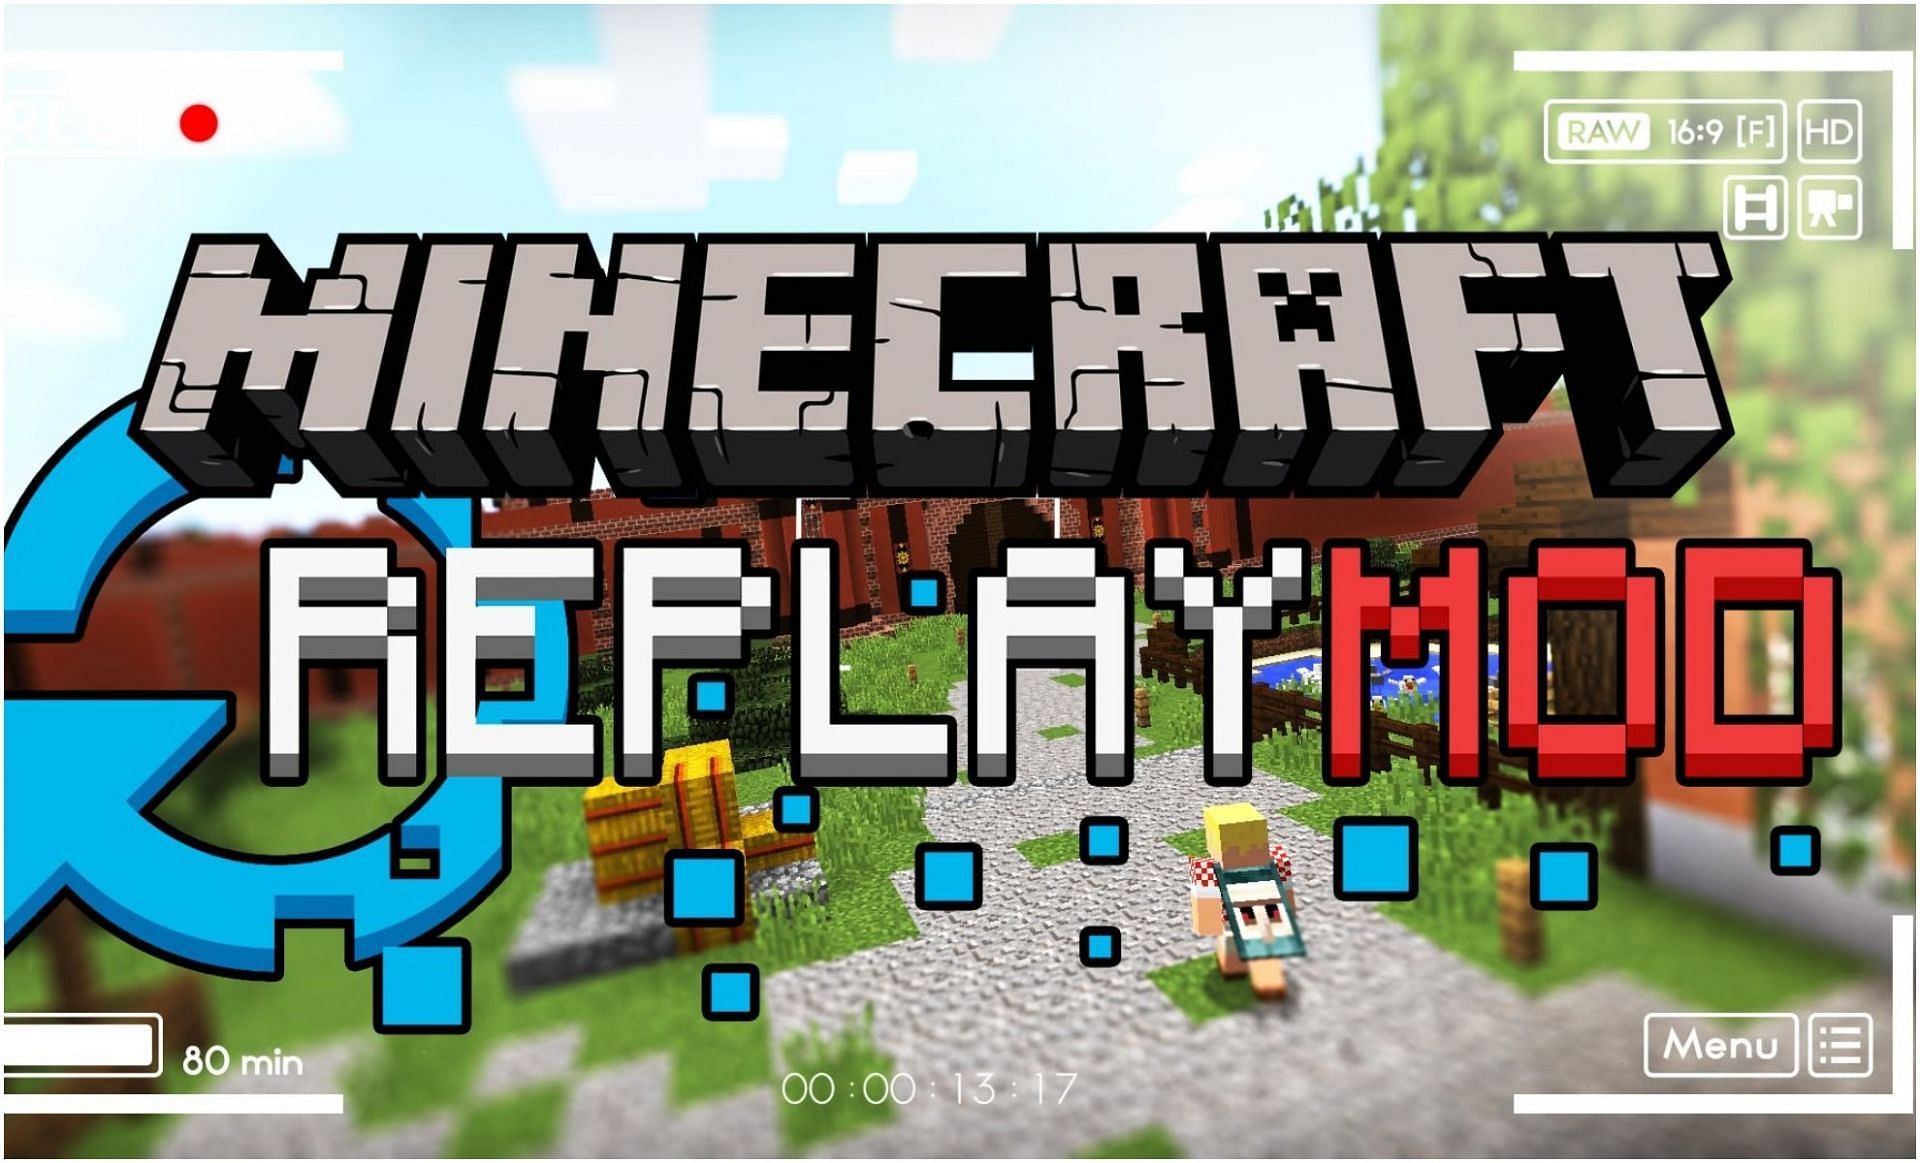 The title screen for the Replay mod (Image via Minecraft)